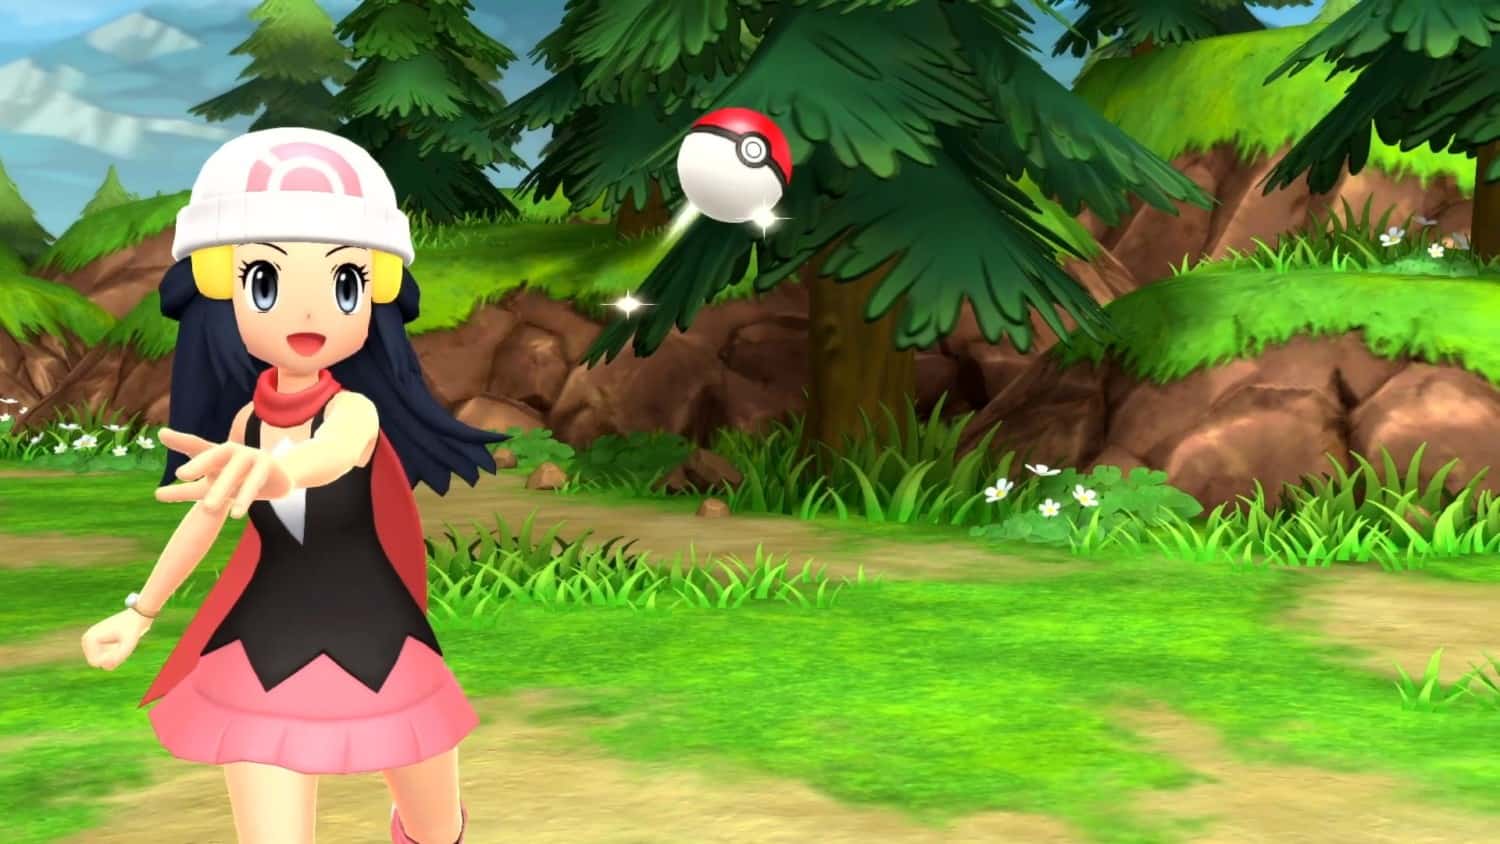 Pokémon: Dawn's Biography, Facts, and Trivia - Cheat Code Central